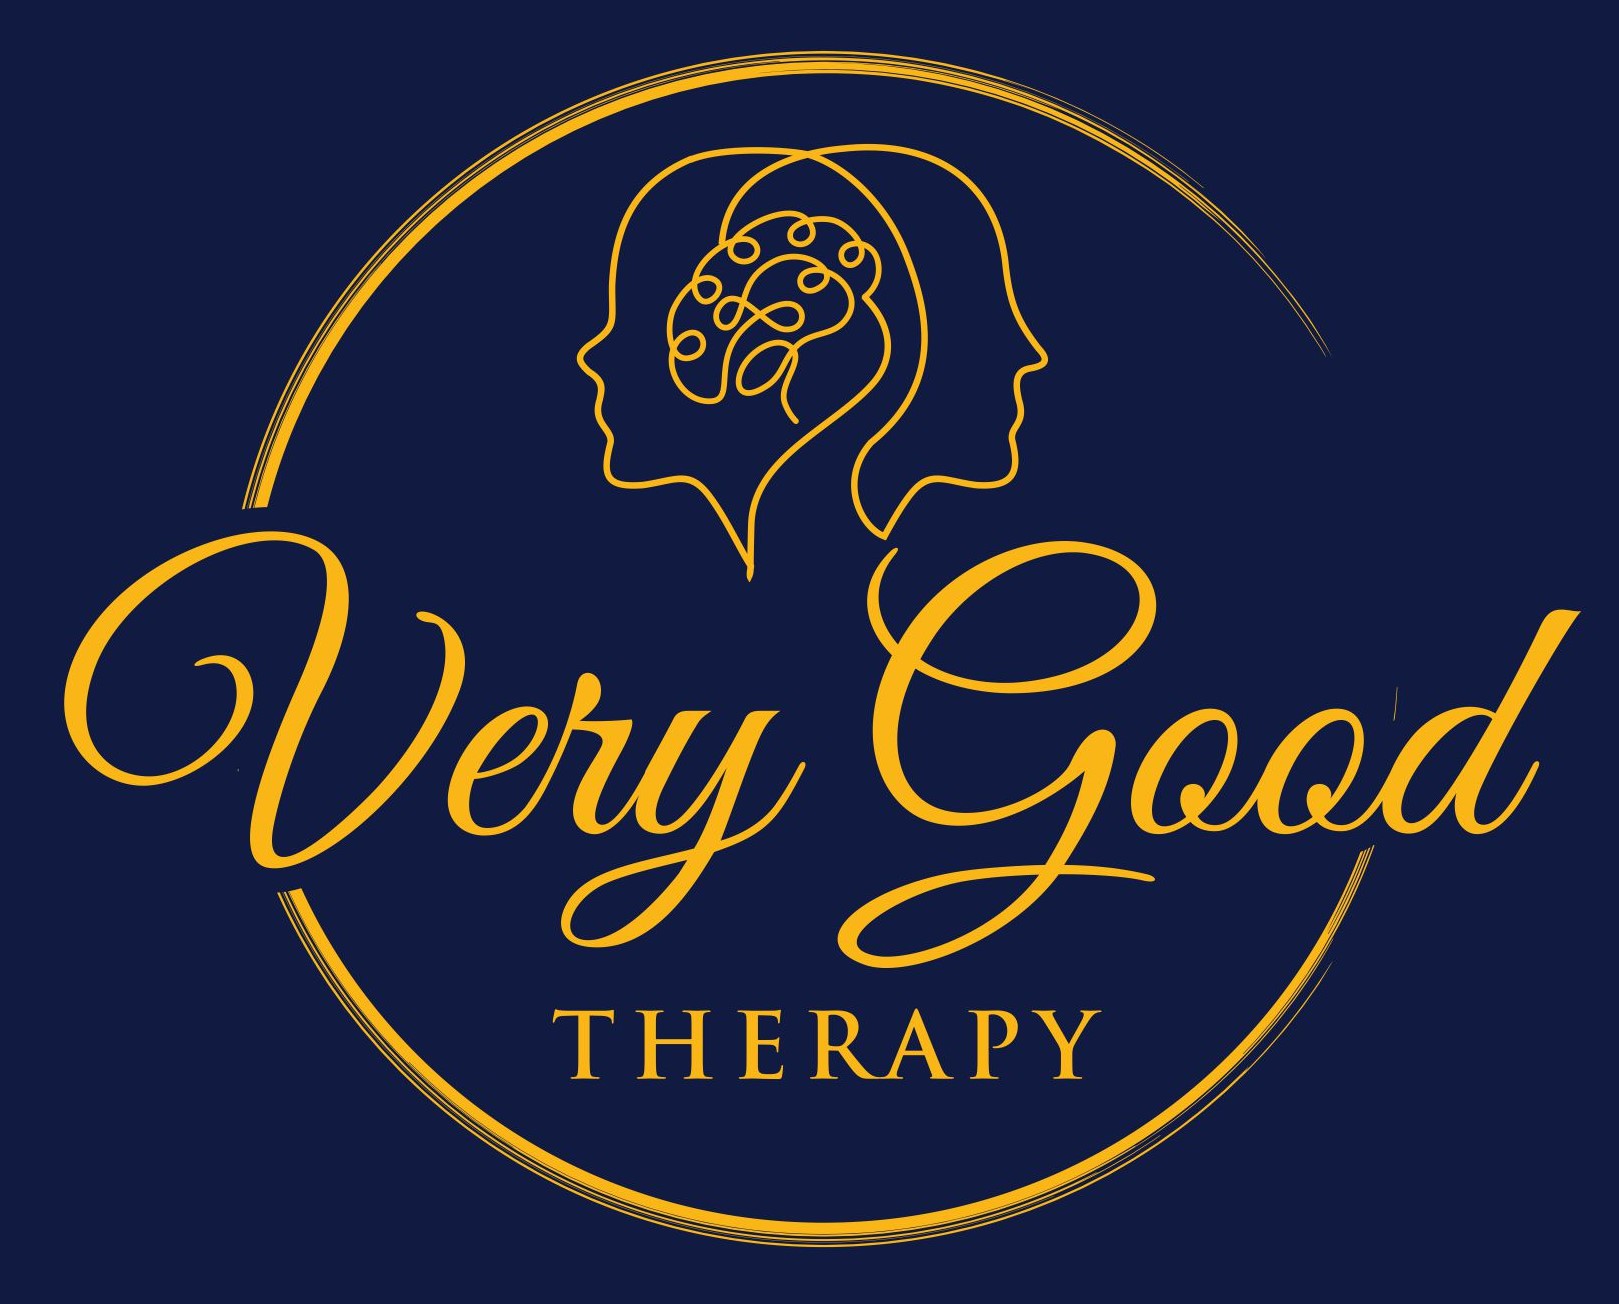 Very Good Therapy